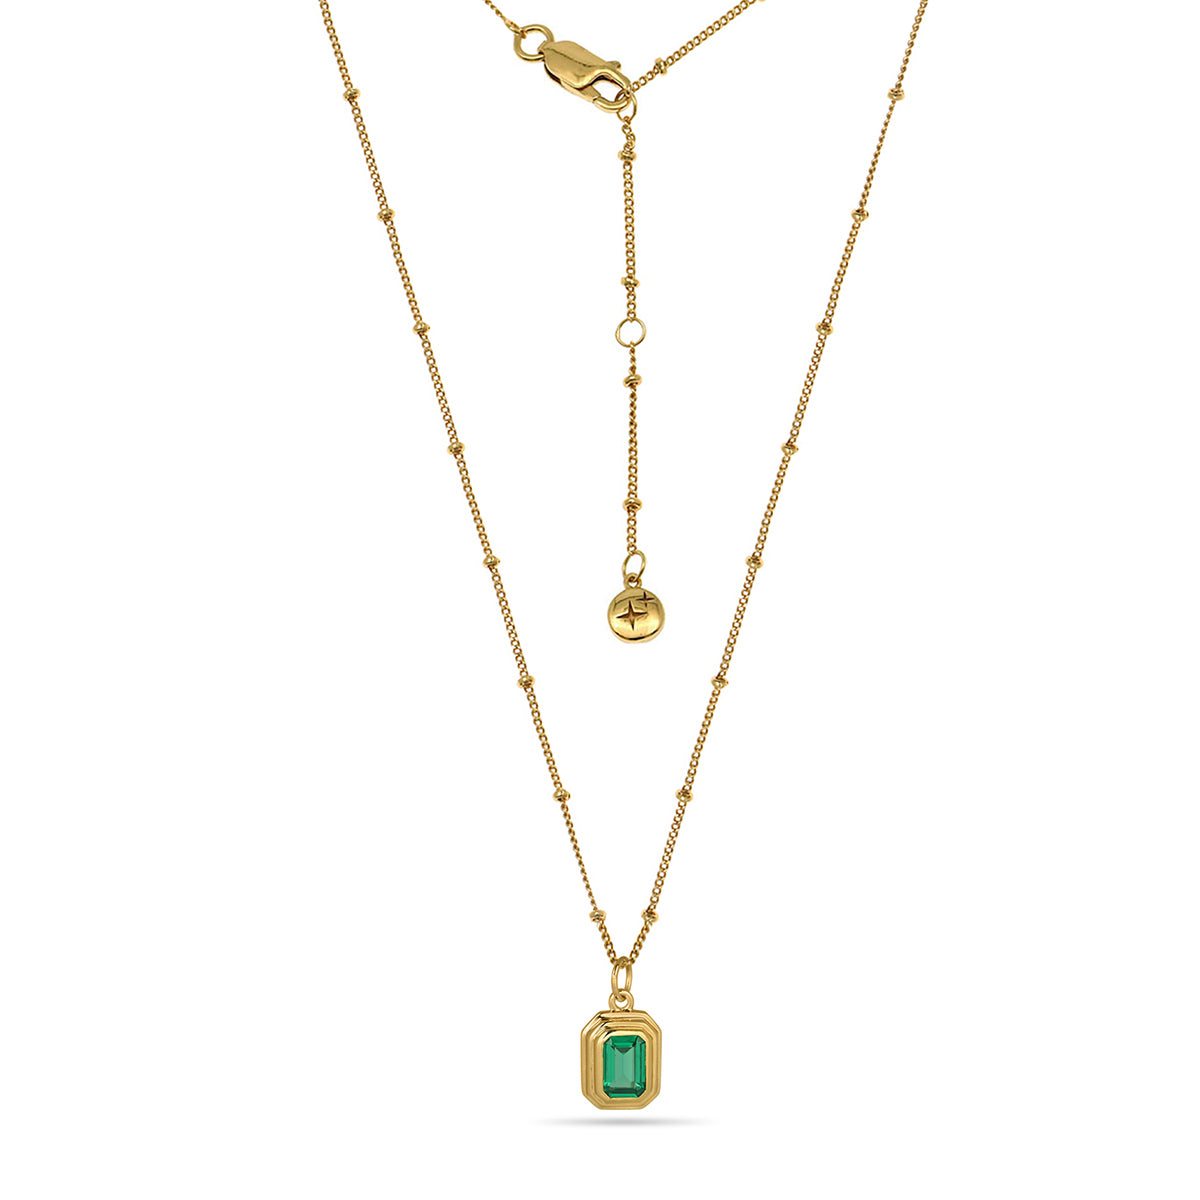 Nano Emerald Gem Charm Necklace 18ct Gold Plated